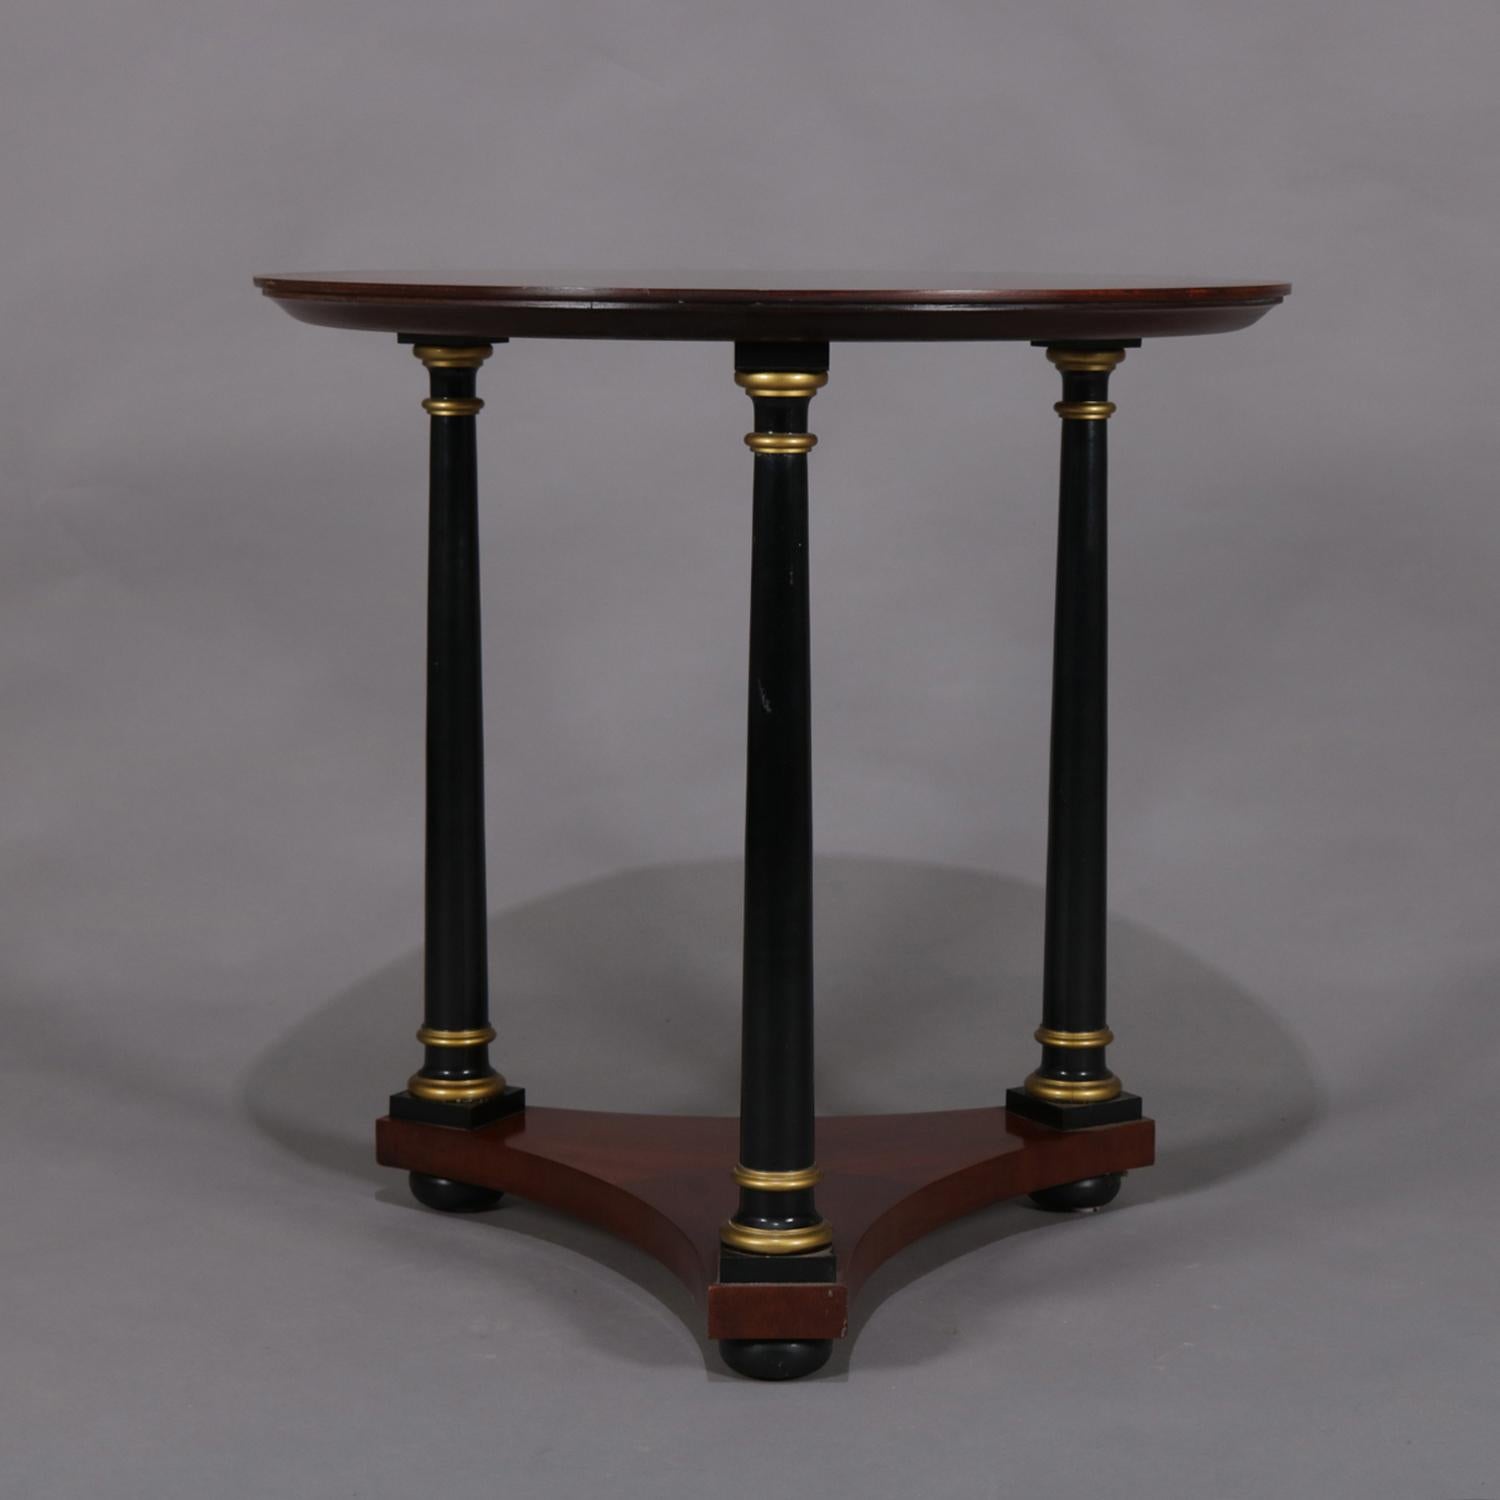 English Regency style centre table features mahogany construction with round and bookmatched top supported by three ebonized Corinthian column-form supports having gilt highlights and seated on triangular plinth raised on ebonized ball feet, 20th